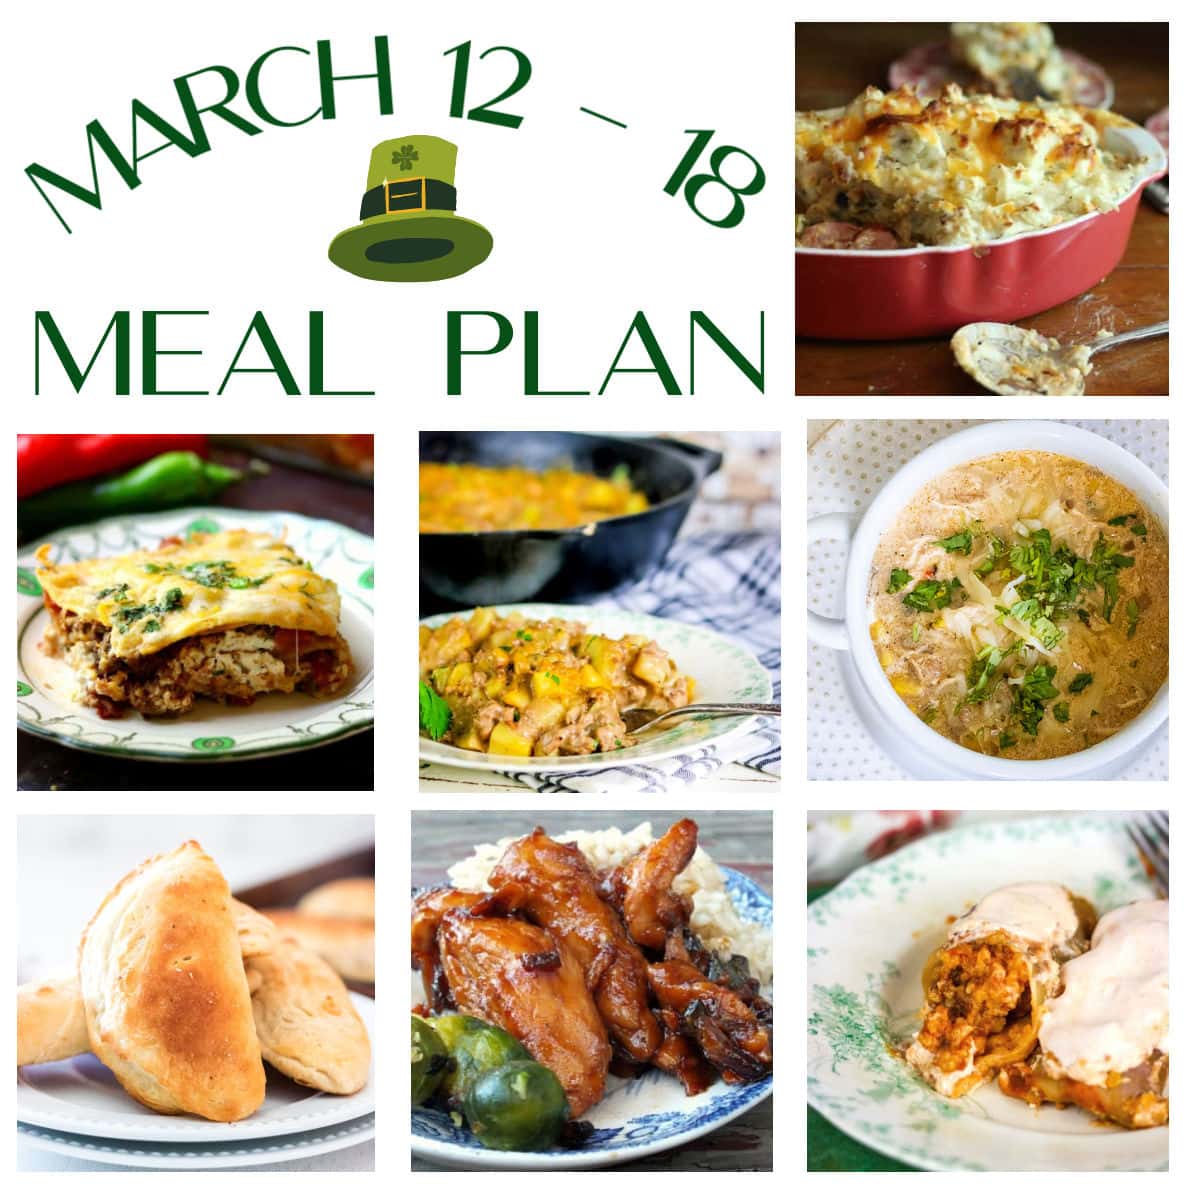 Collage of main dishes from the March 12-18 meal plan.